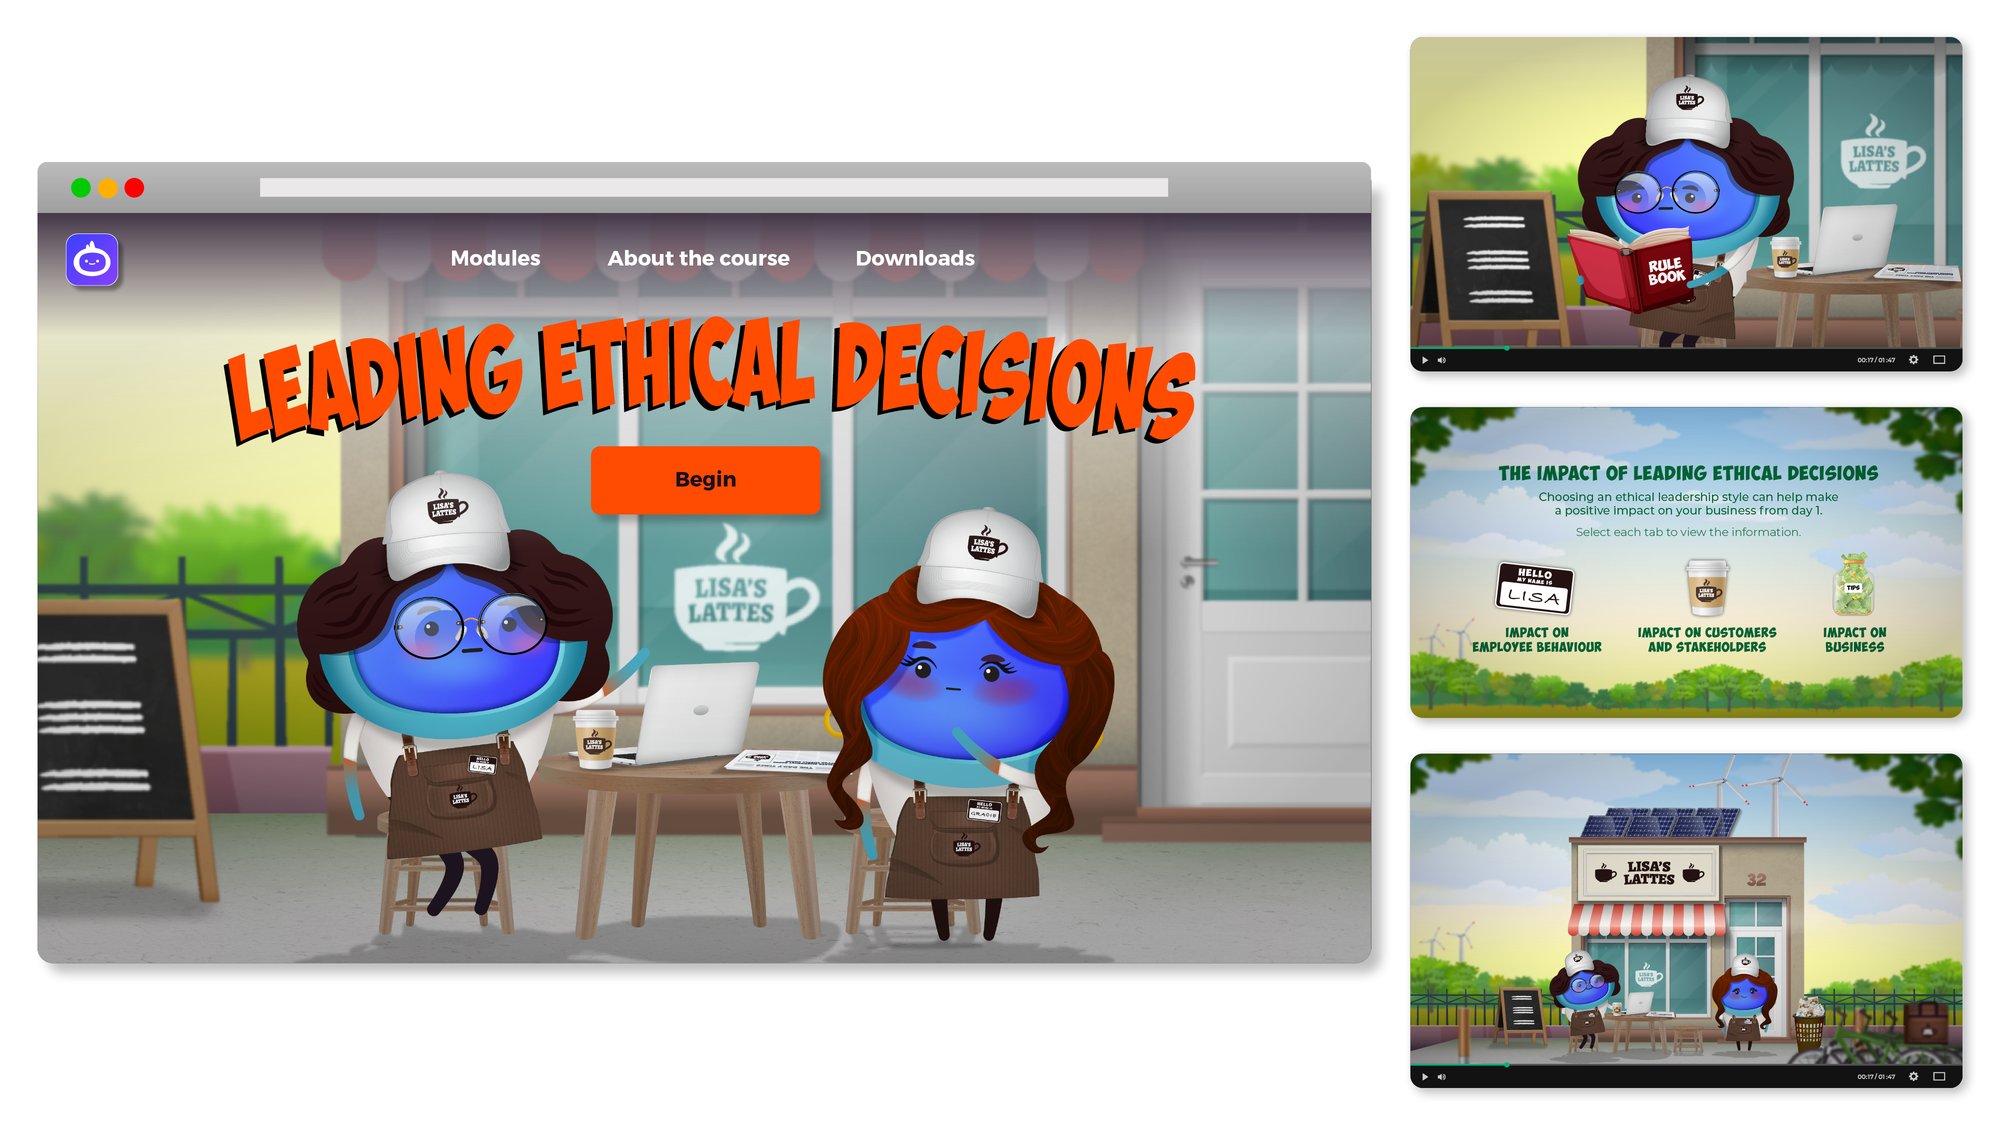 iAM 00342 - Leading Ethical Decisions - Landing page